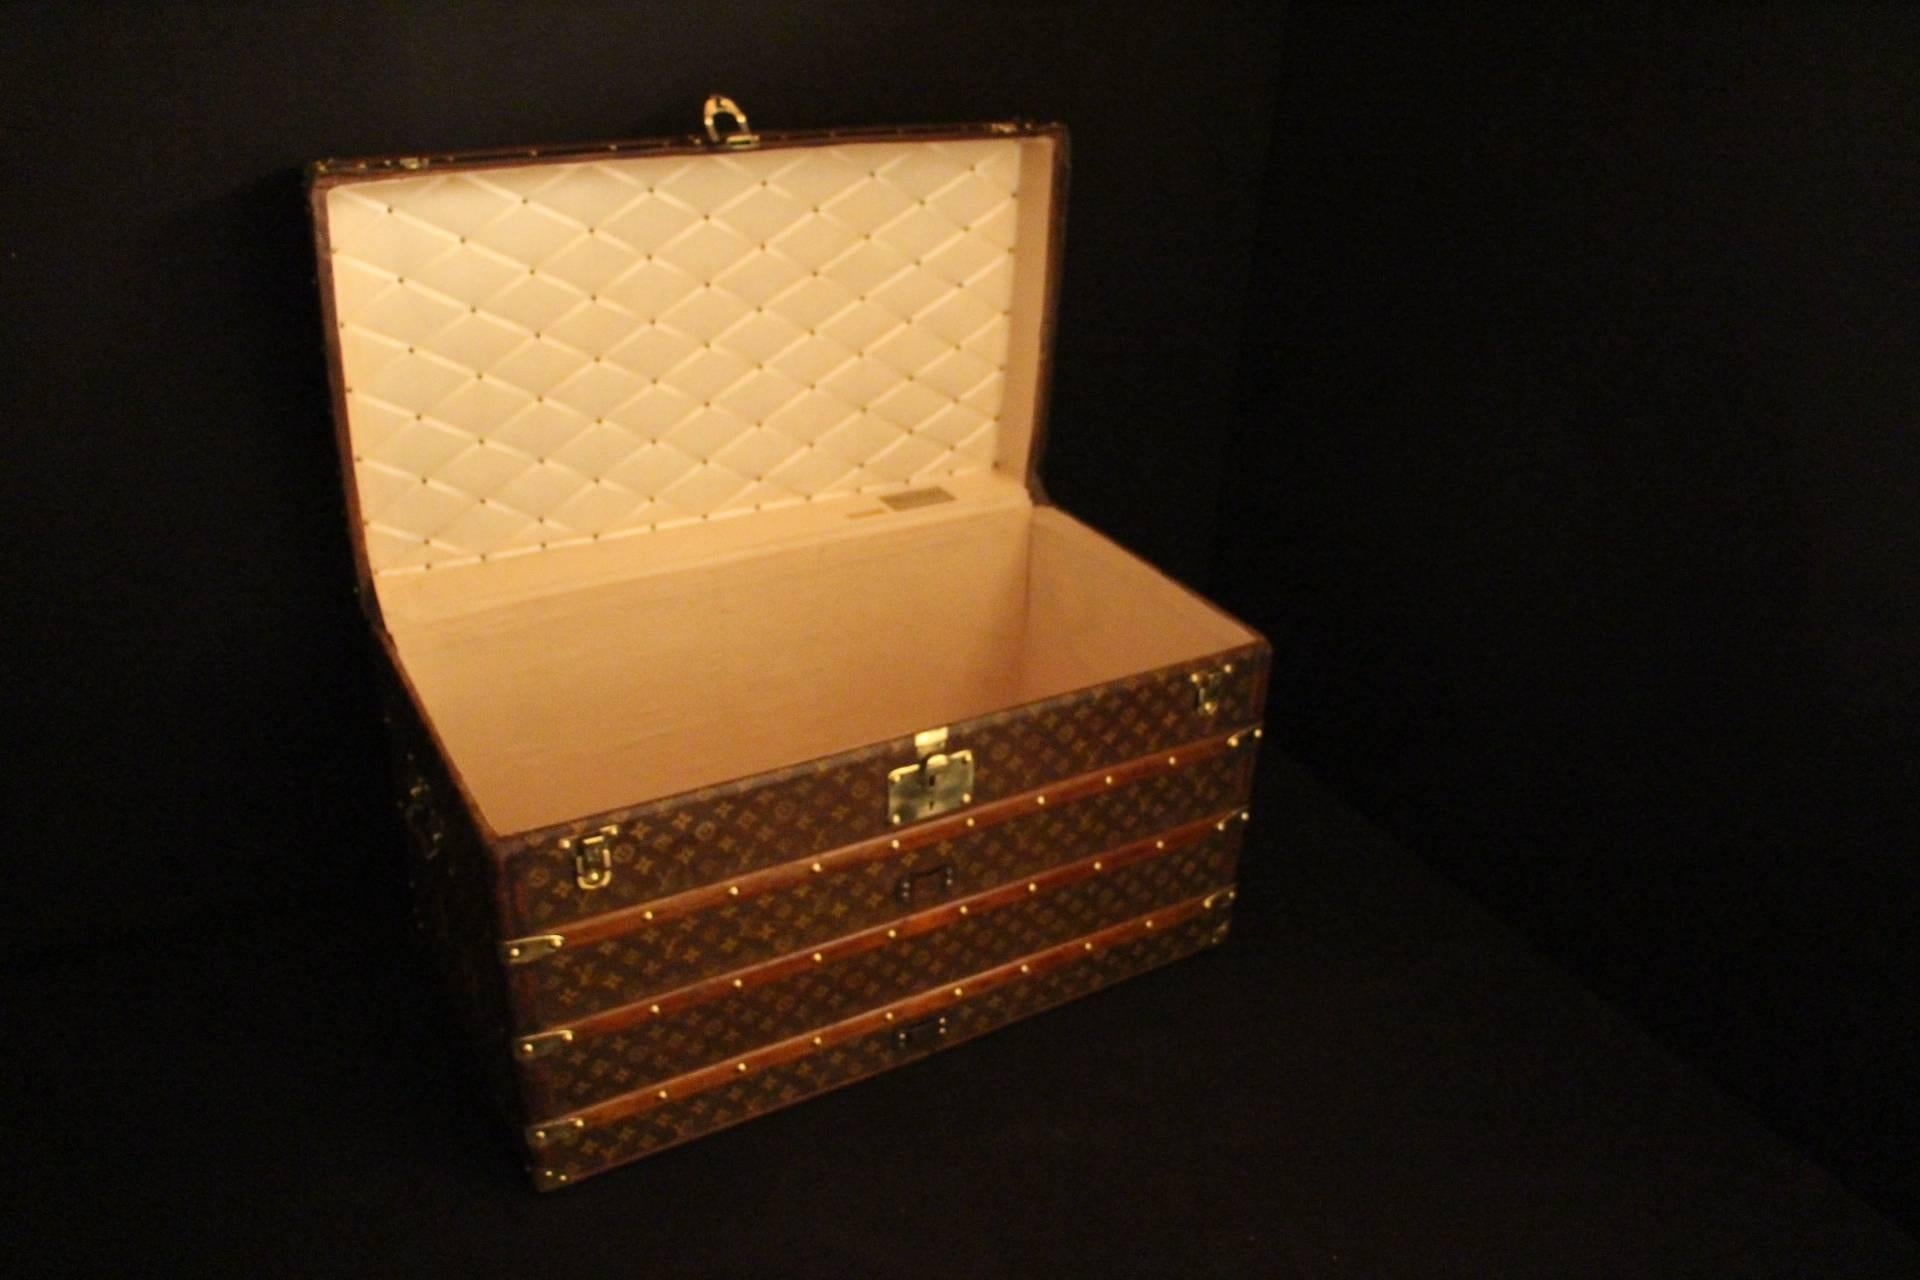 Superb Louis Vuitton steamer trunk featuring stenciled canvas,leather trim,brass locks,corners and hanles.Very warm patina.
Beige interior in very good condition,clean and fresh,no smell.
Perfect for storage.